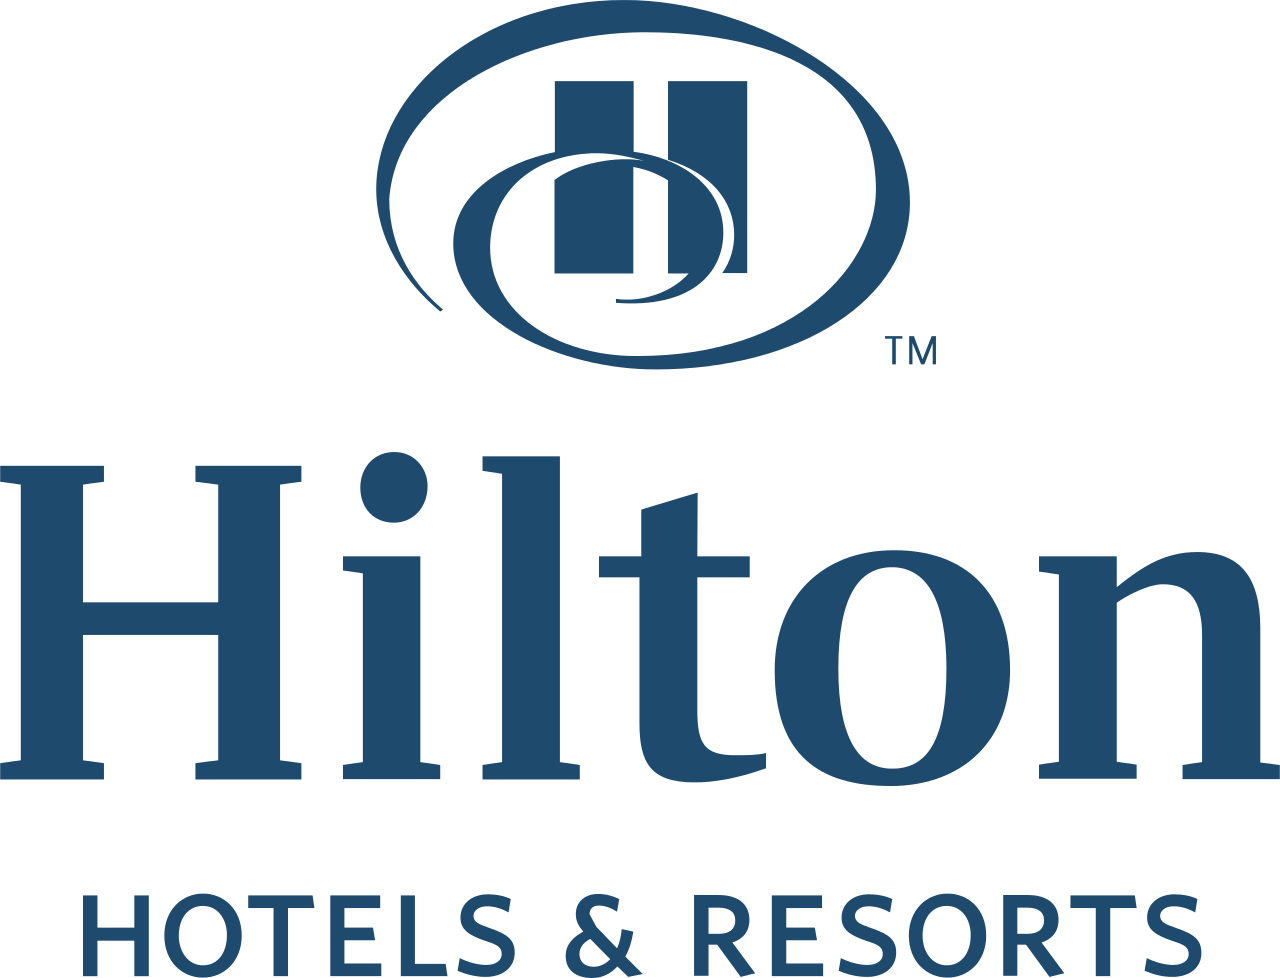 Hilton Seattle – Very unsanitary stay & HORRIBLE customer service